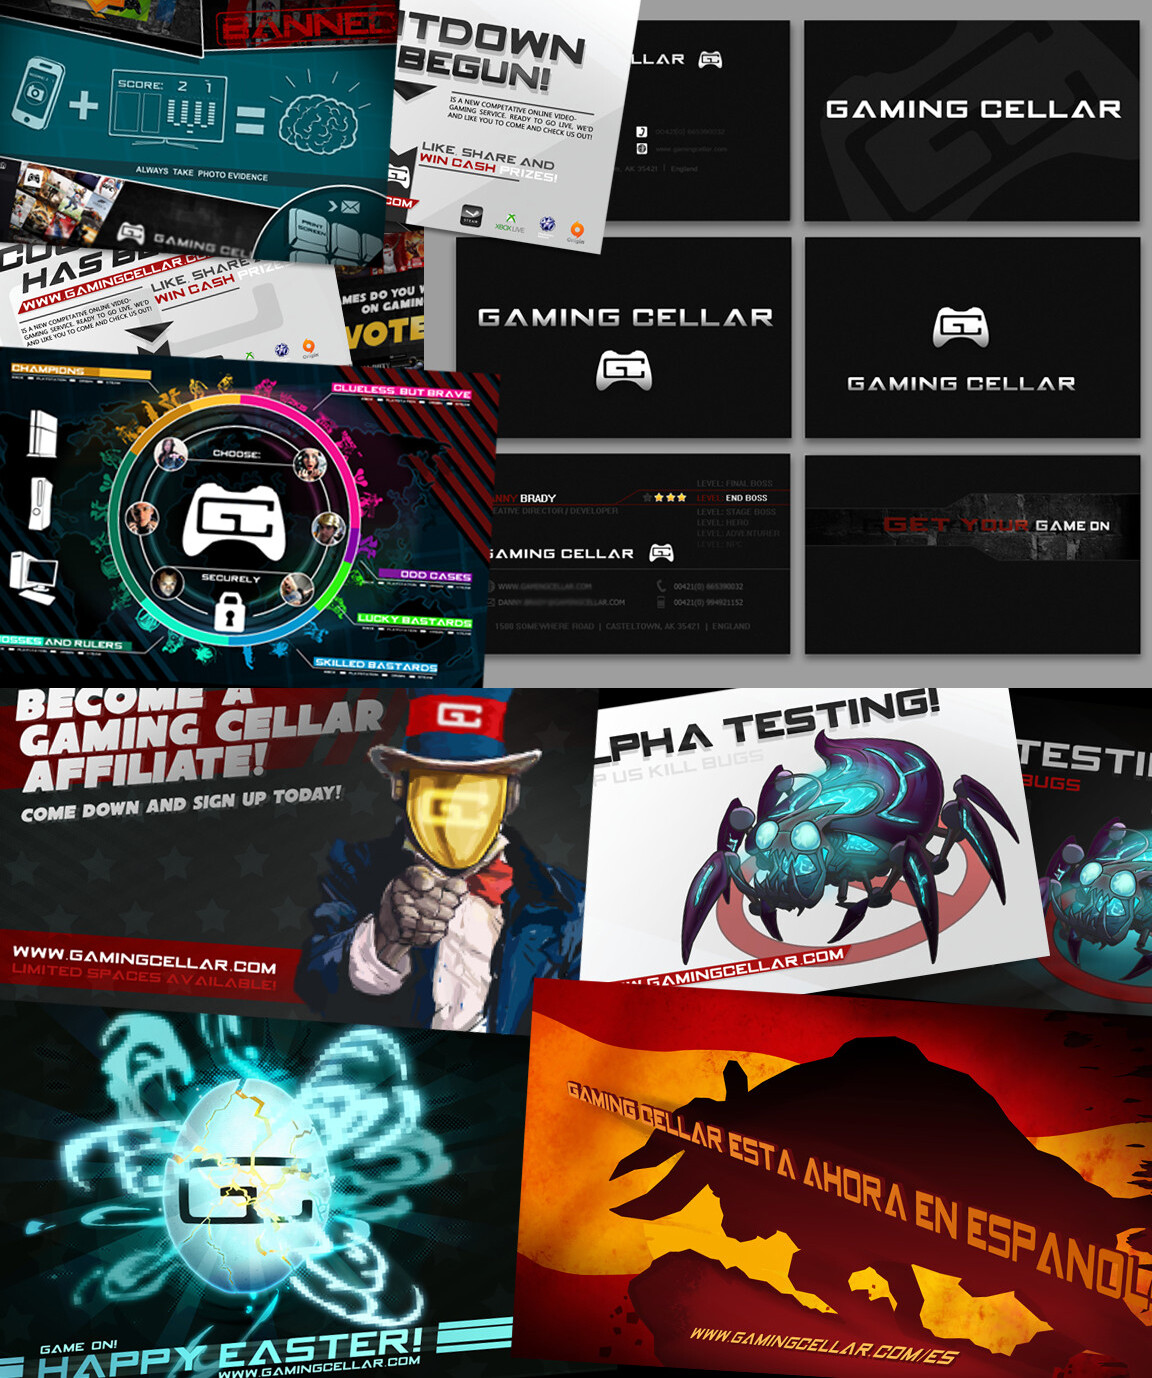 Promotion, info-graphics and business cards for "Gaming Cellar".